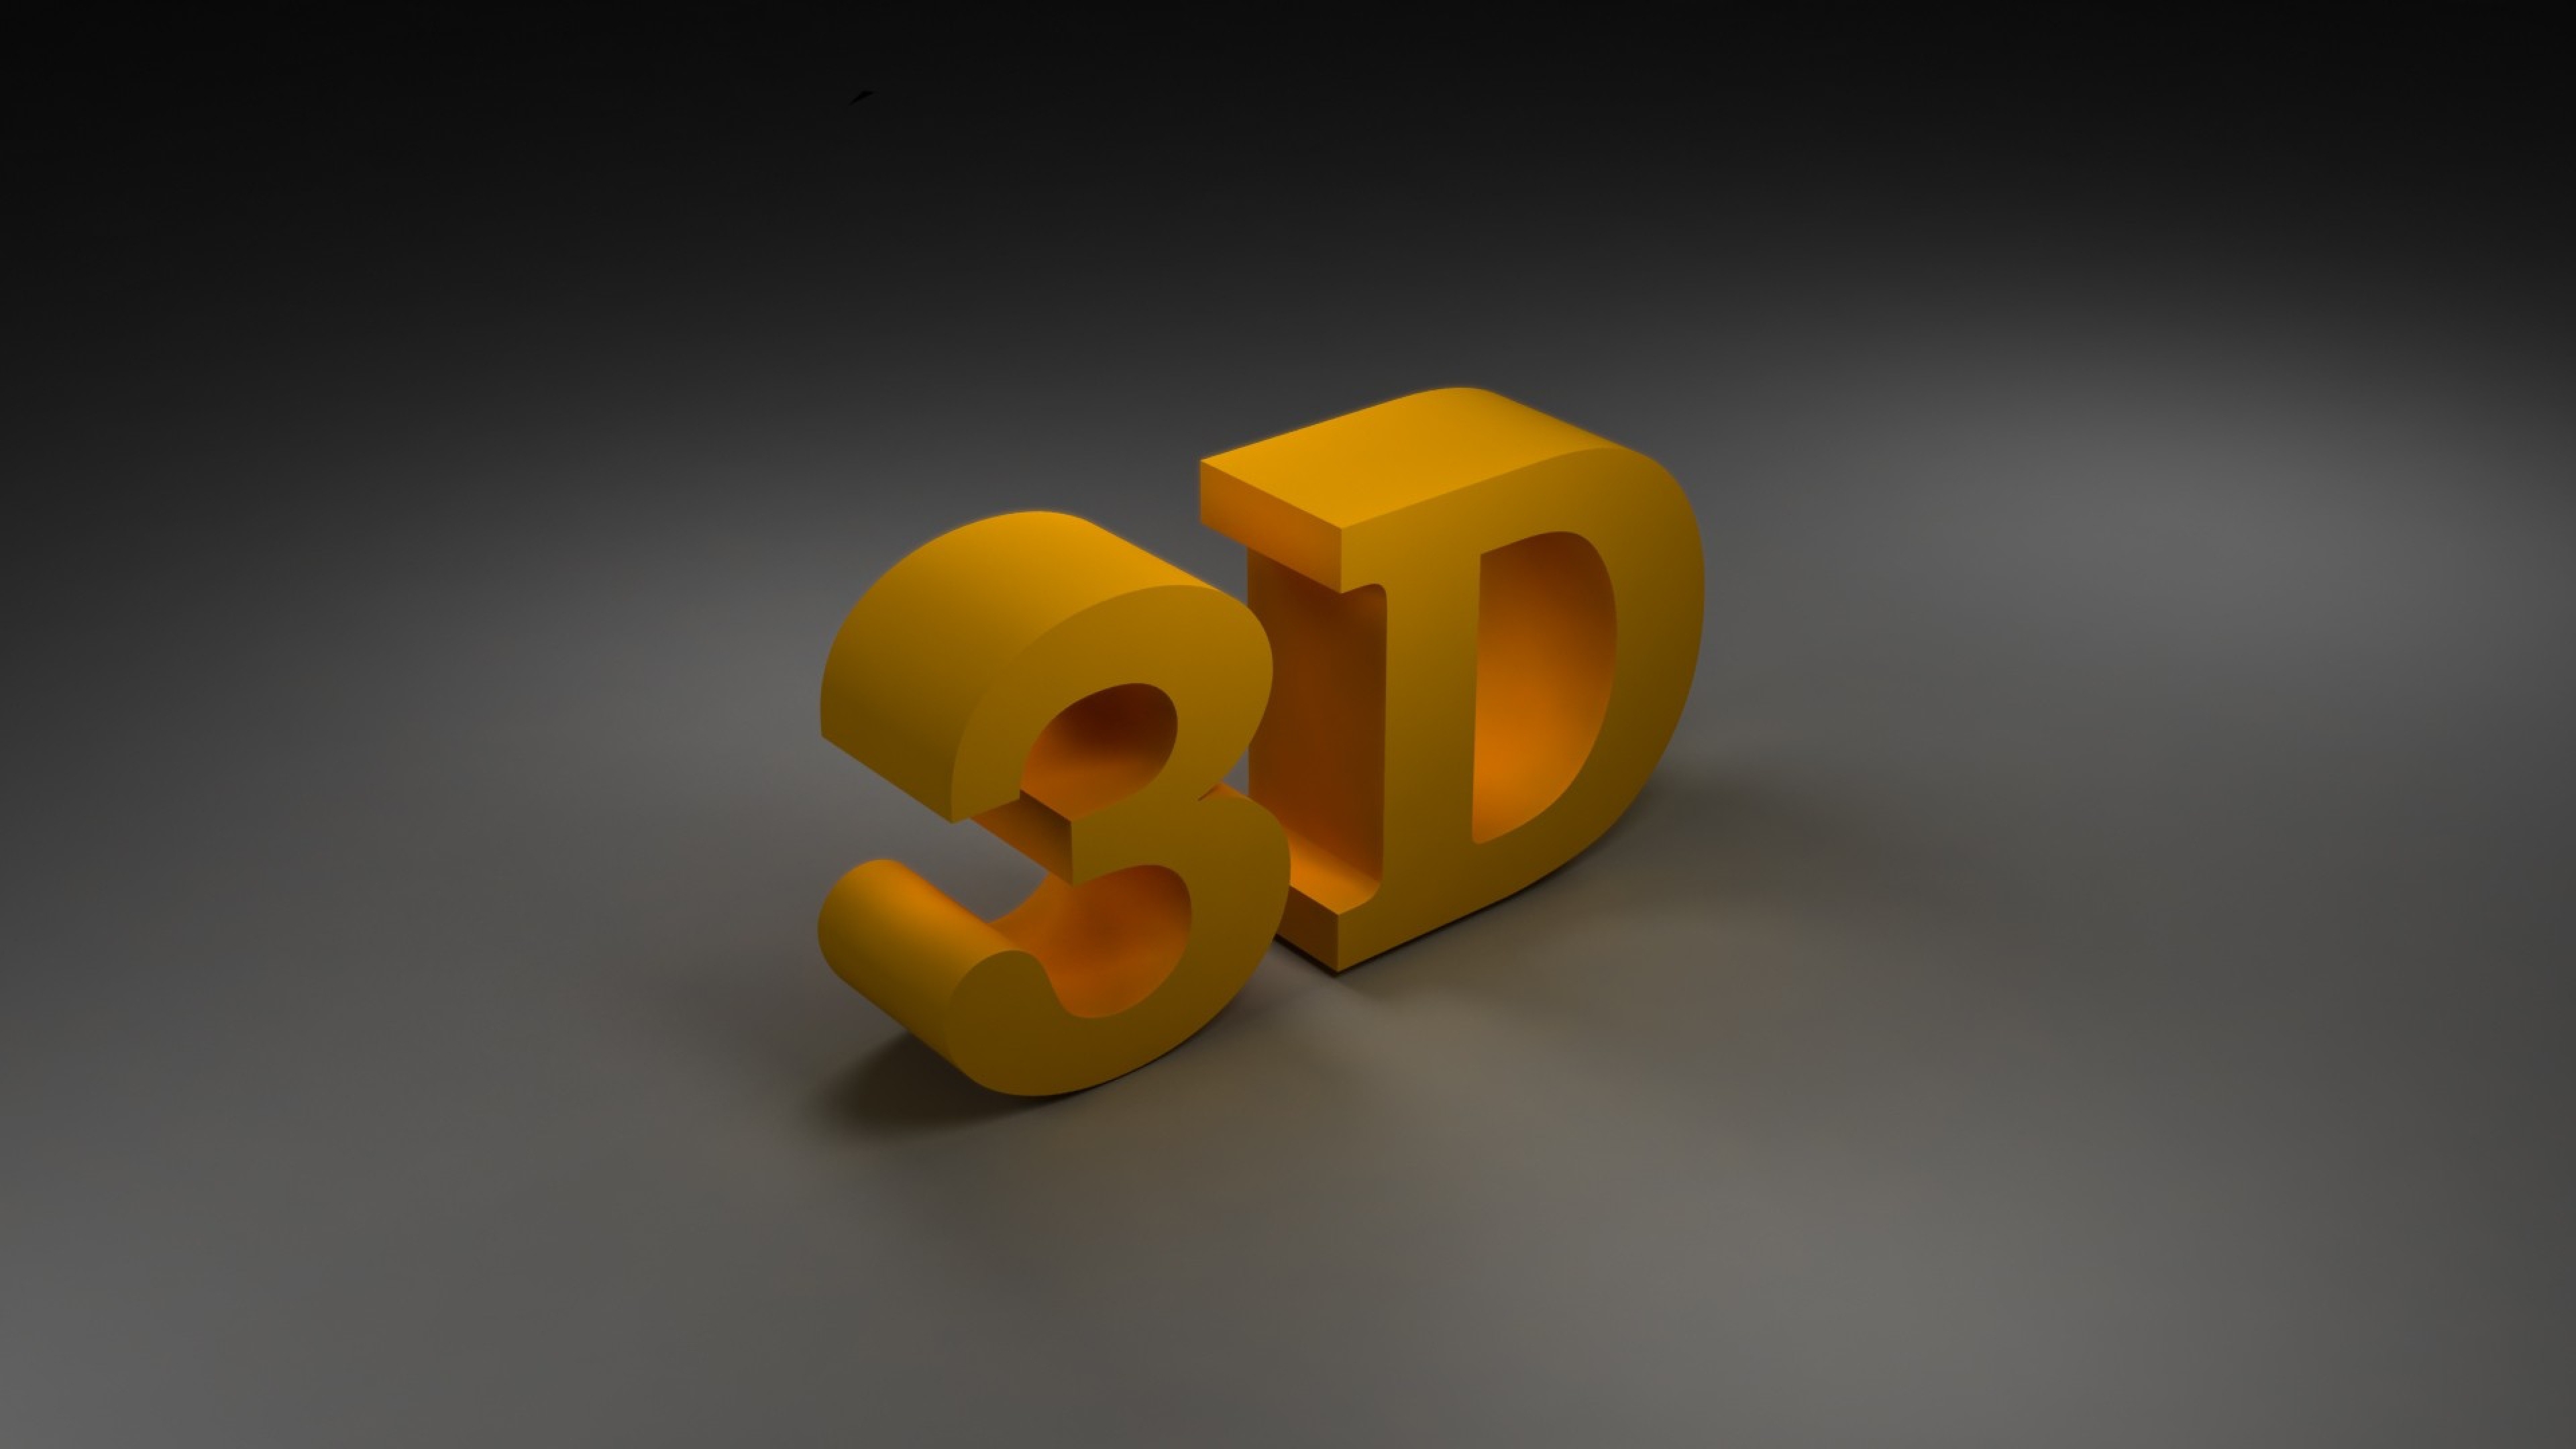 Only 3d